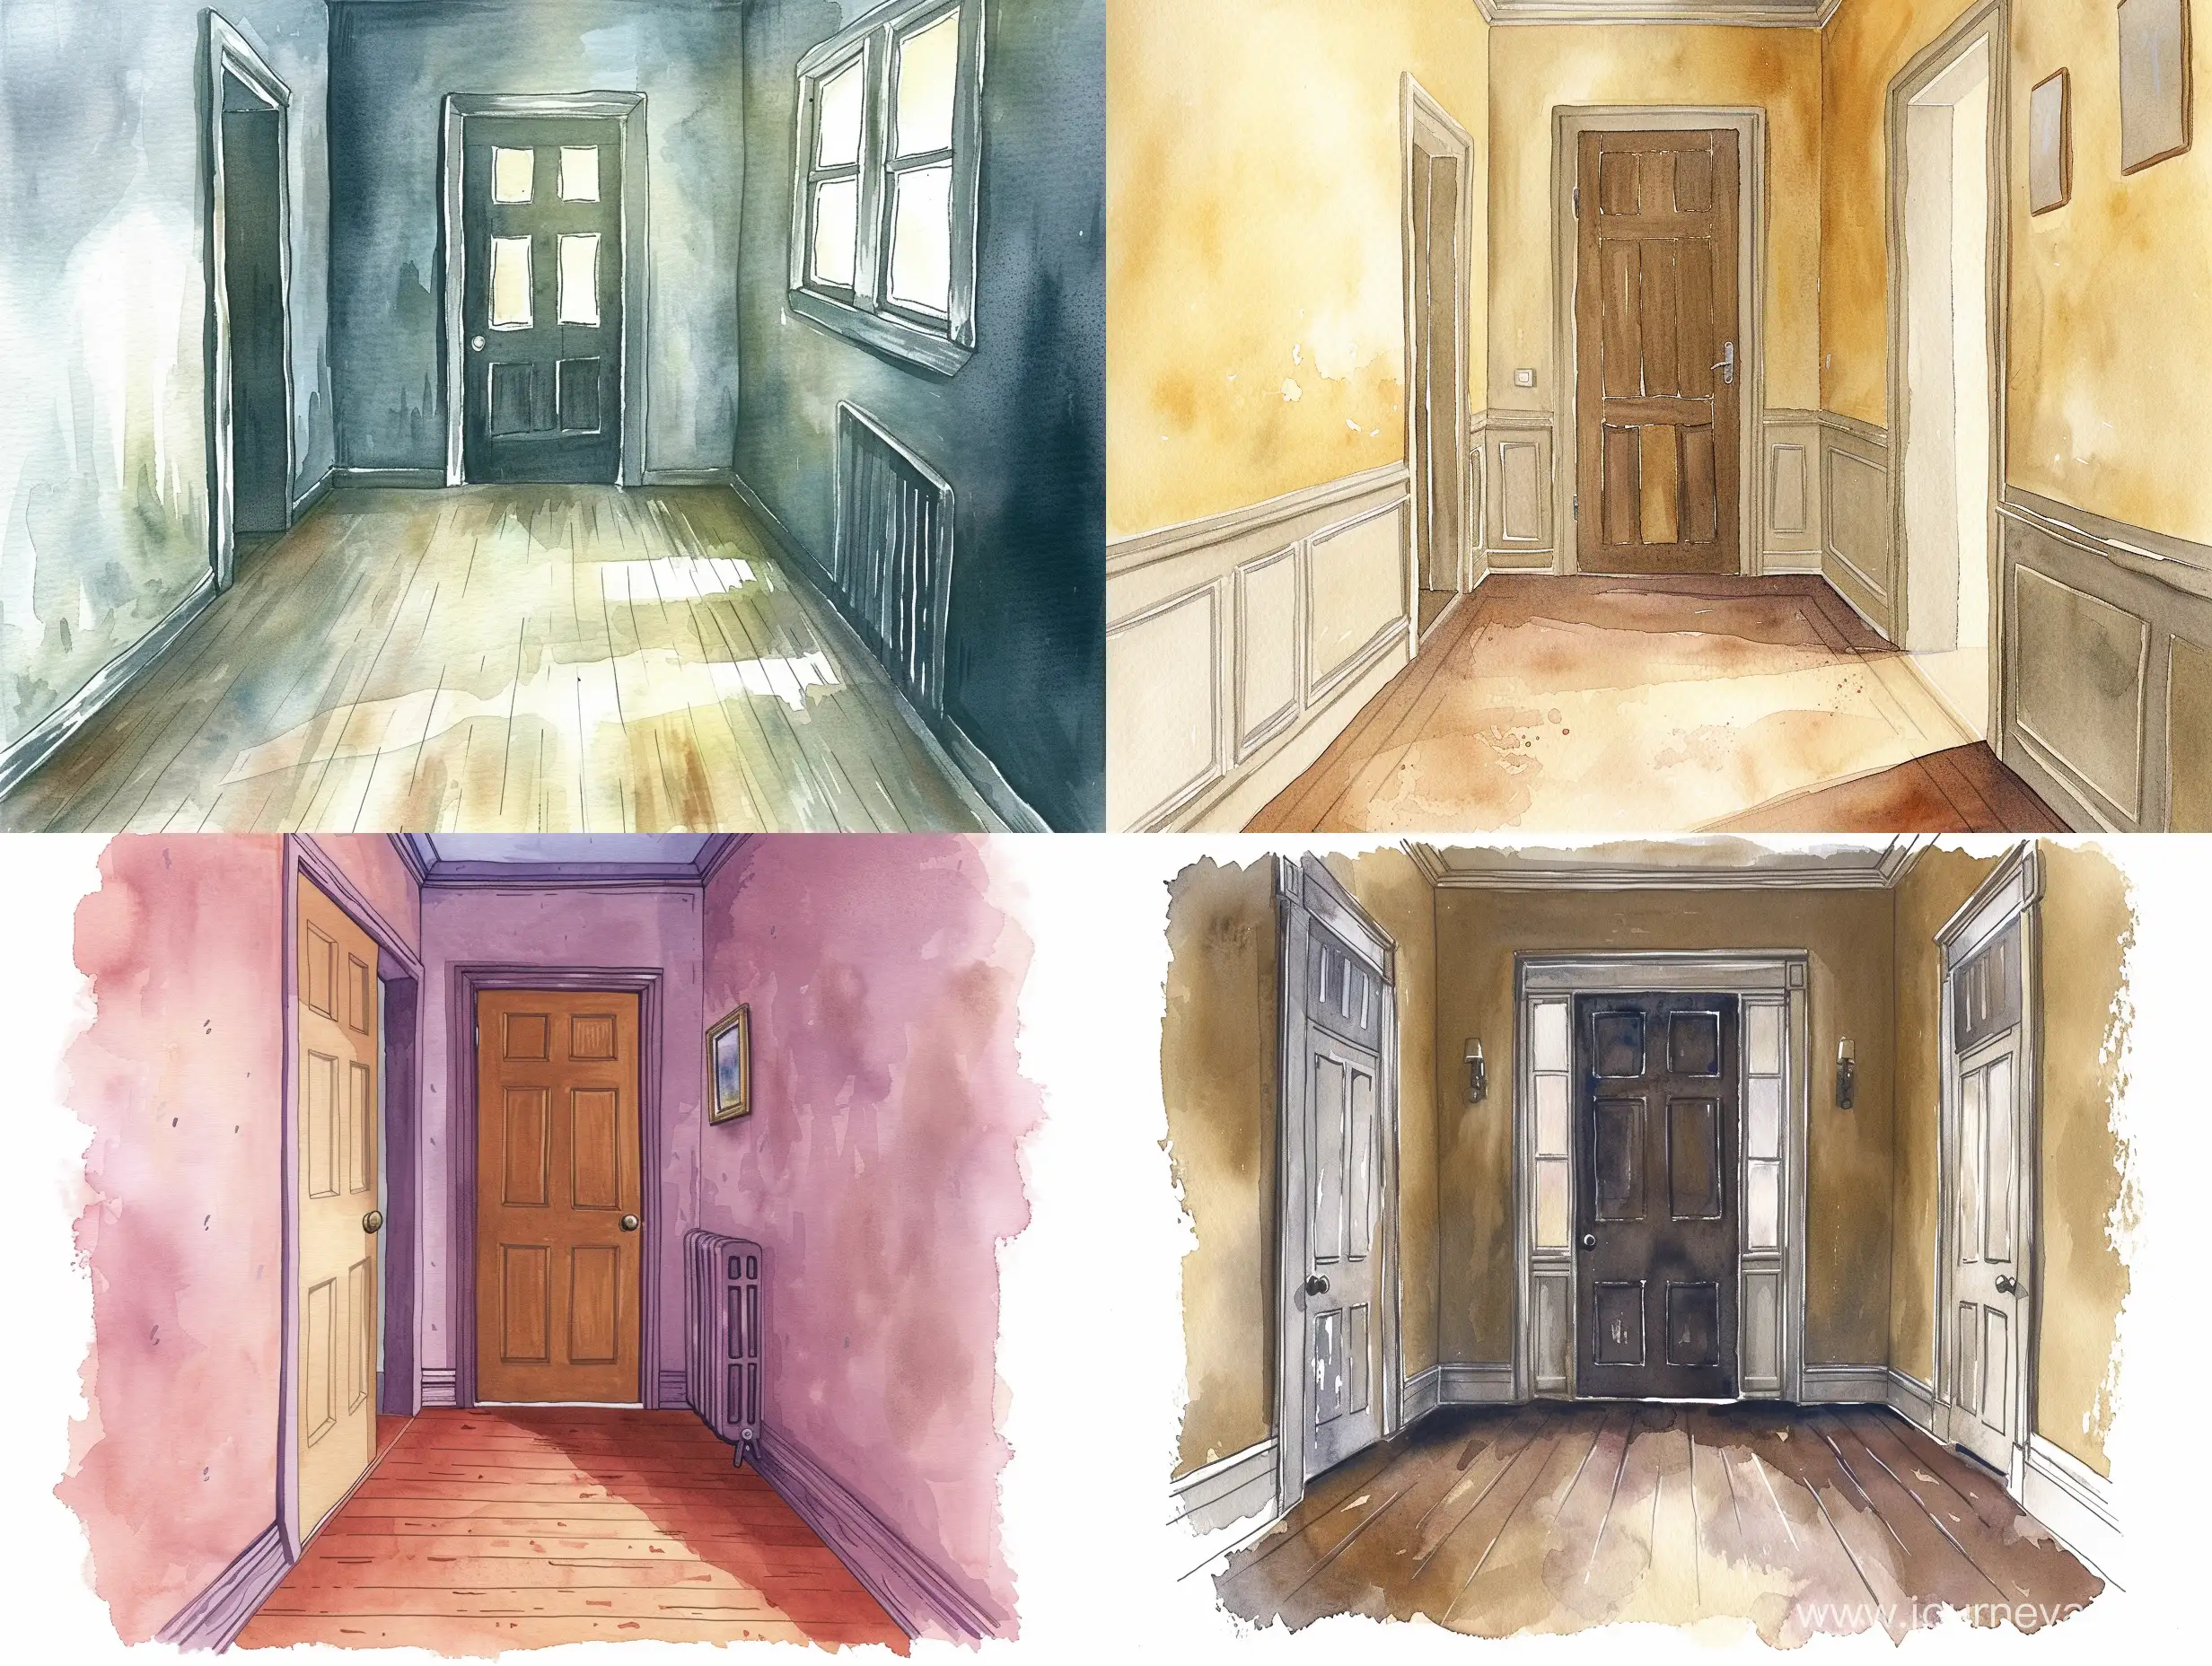 Watercolor-Painting-of-Interior-House-Corridor-by-Closed-Front-Door